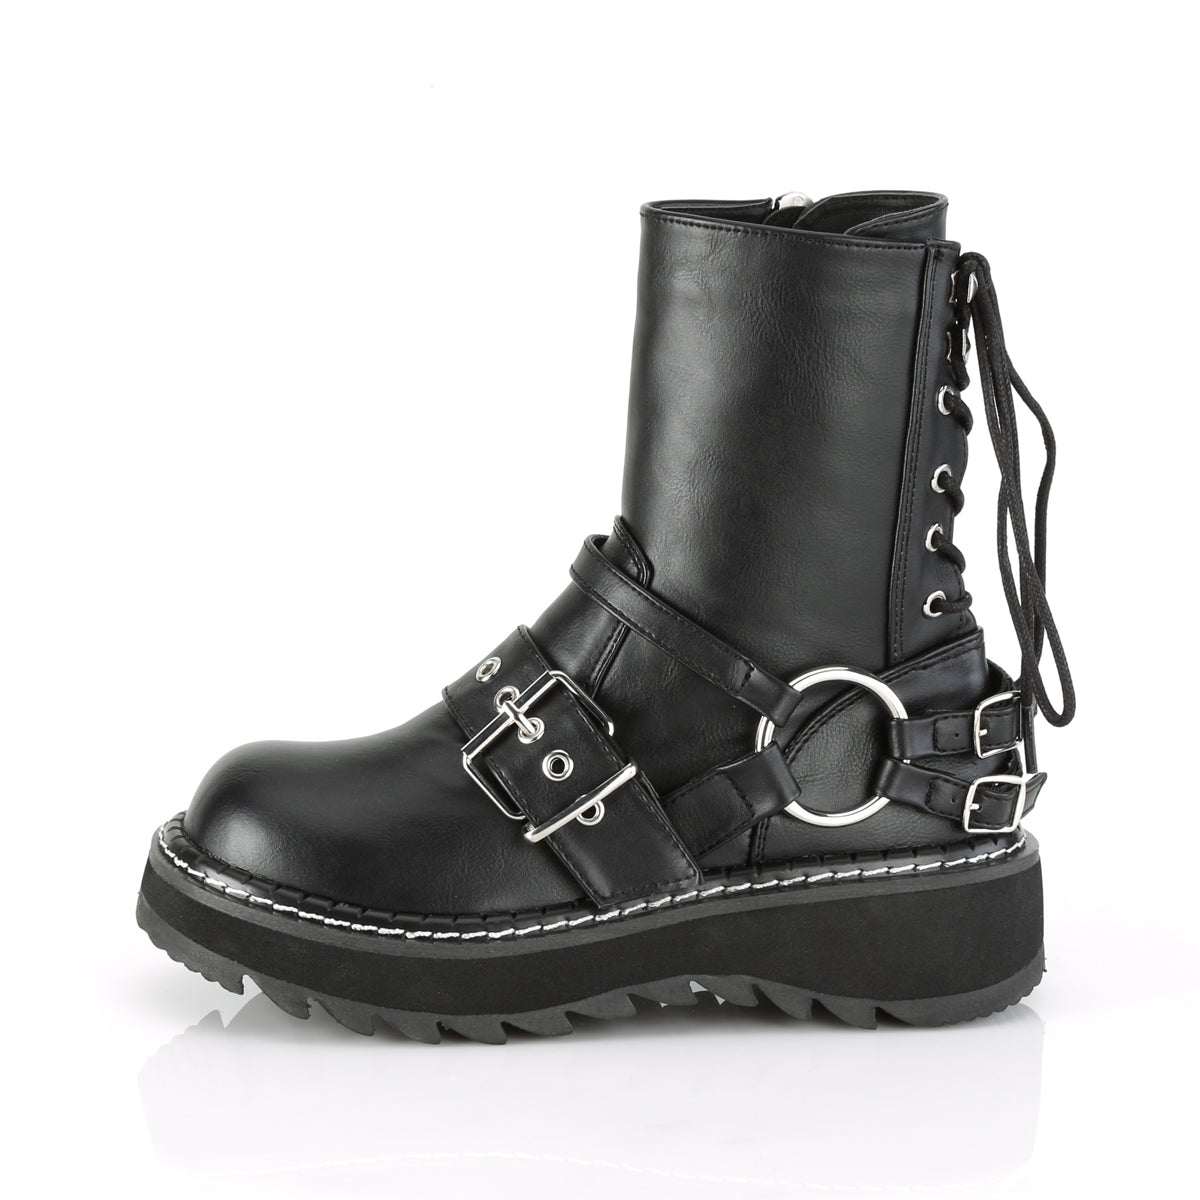 LILITH-210 Black Vegan Leather Ankle Boot Demonia